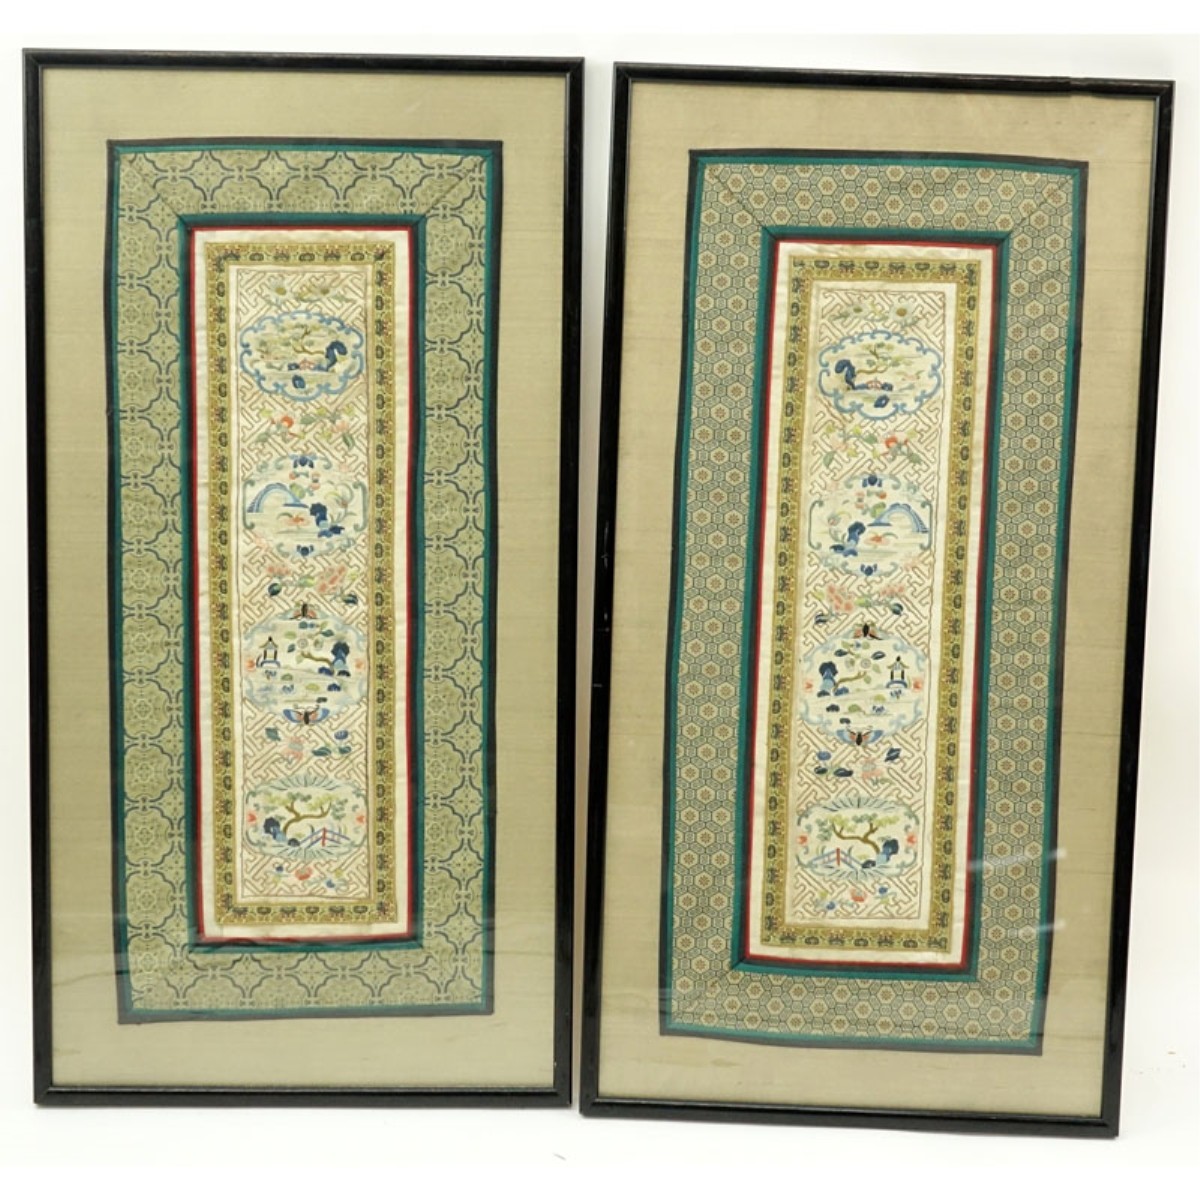 Two (2) Antique Chinese Embroidered Panels